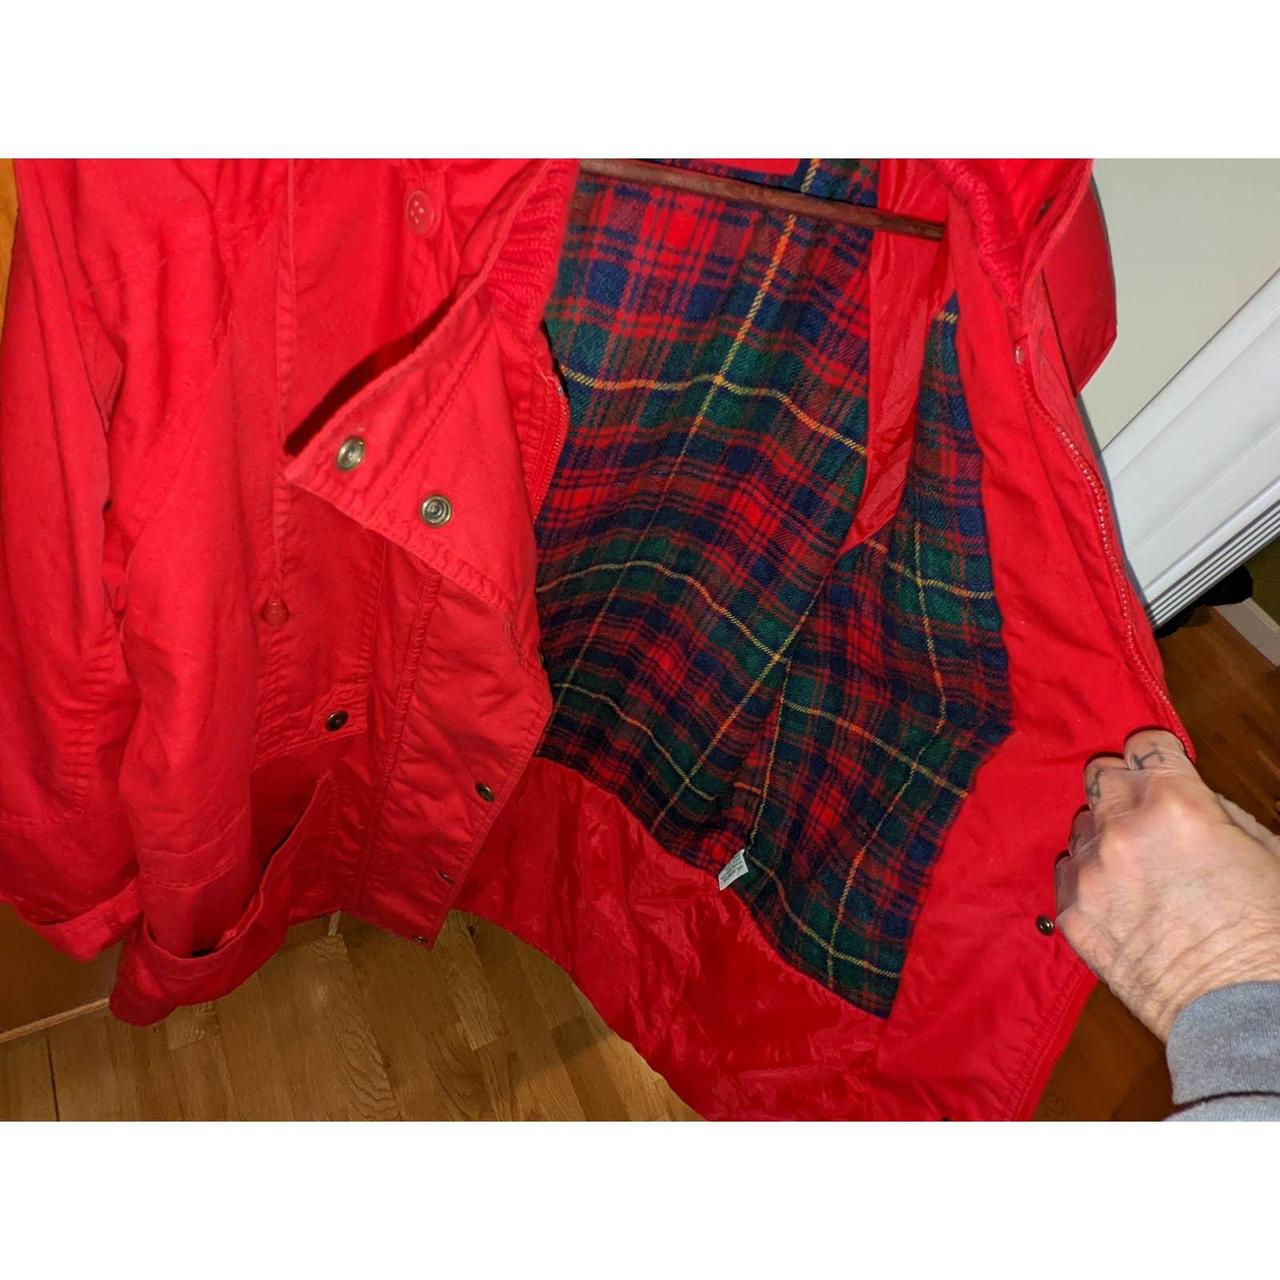 Women's Red and Green Jacket (3)